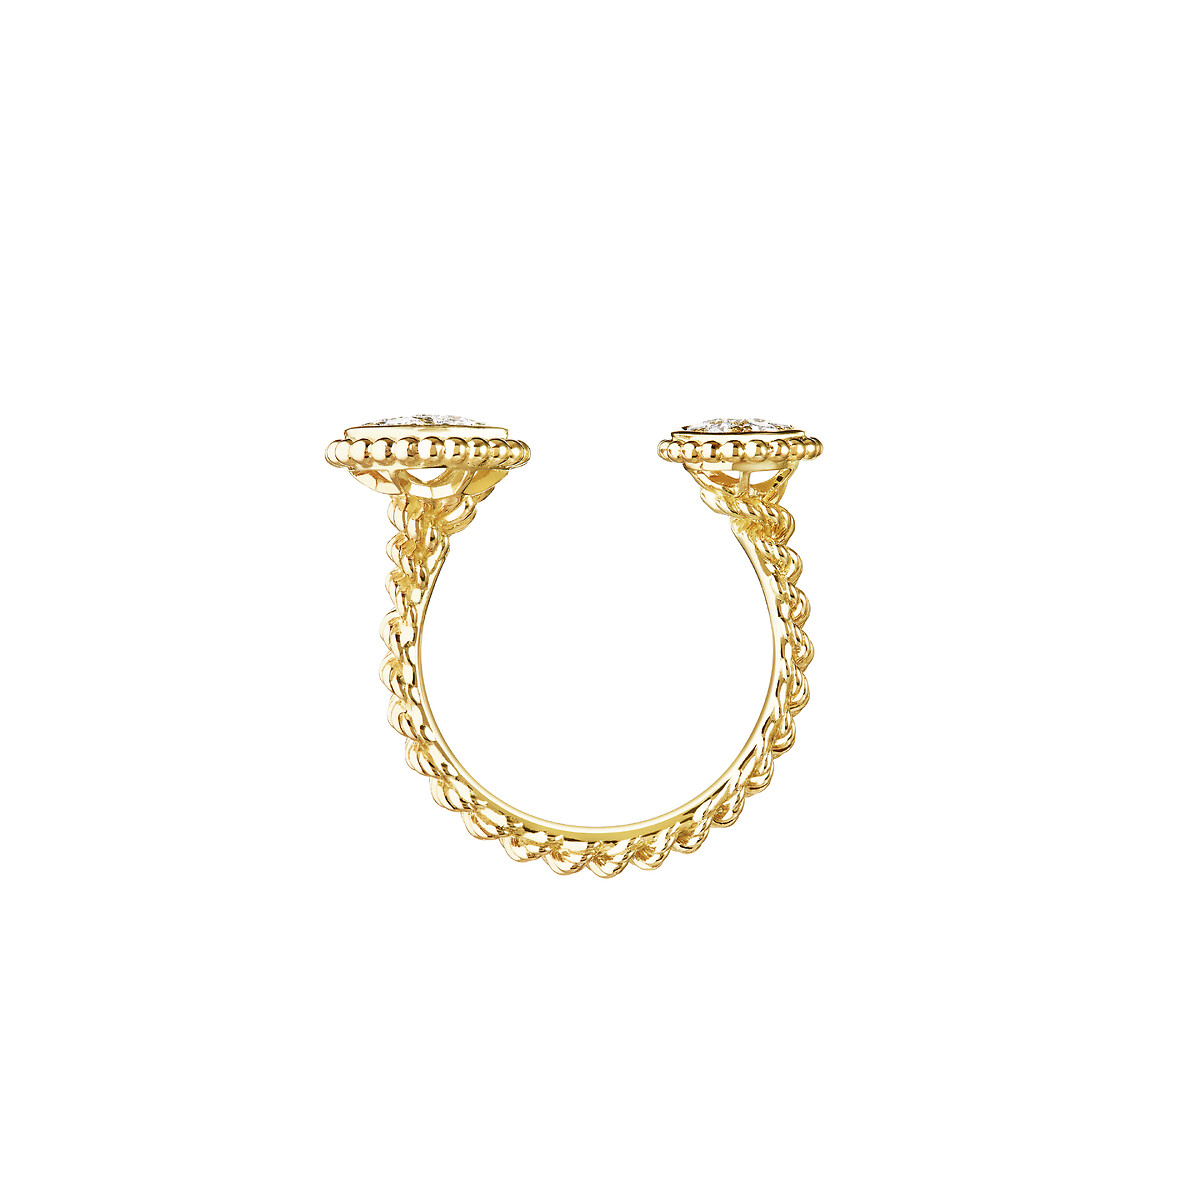 Second product packshot​ Serpent Bohème Ring, S and XS motifs